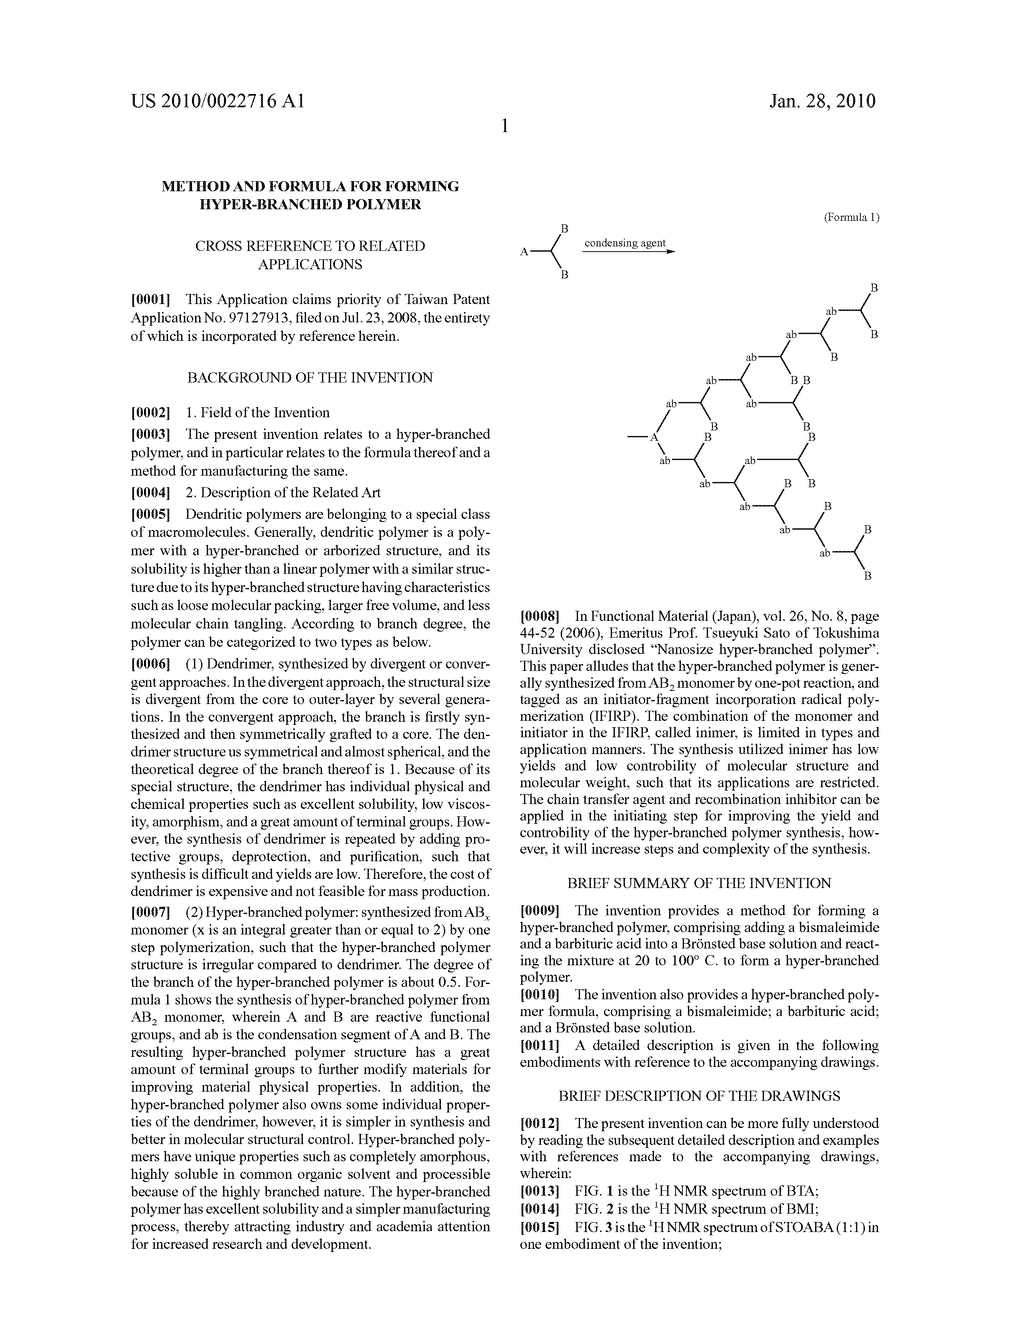 METHOD AND FORMULA FOR FORMING HYPER-BRANCHED POLYMER - diagram, schematic, and image 12